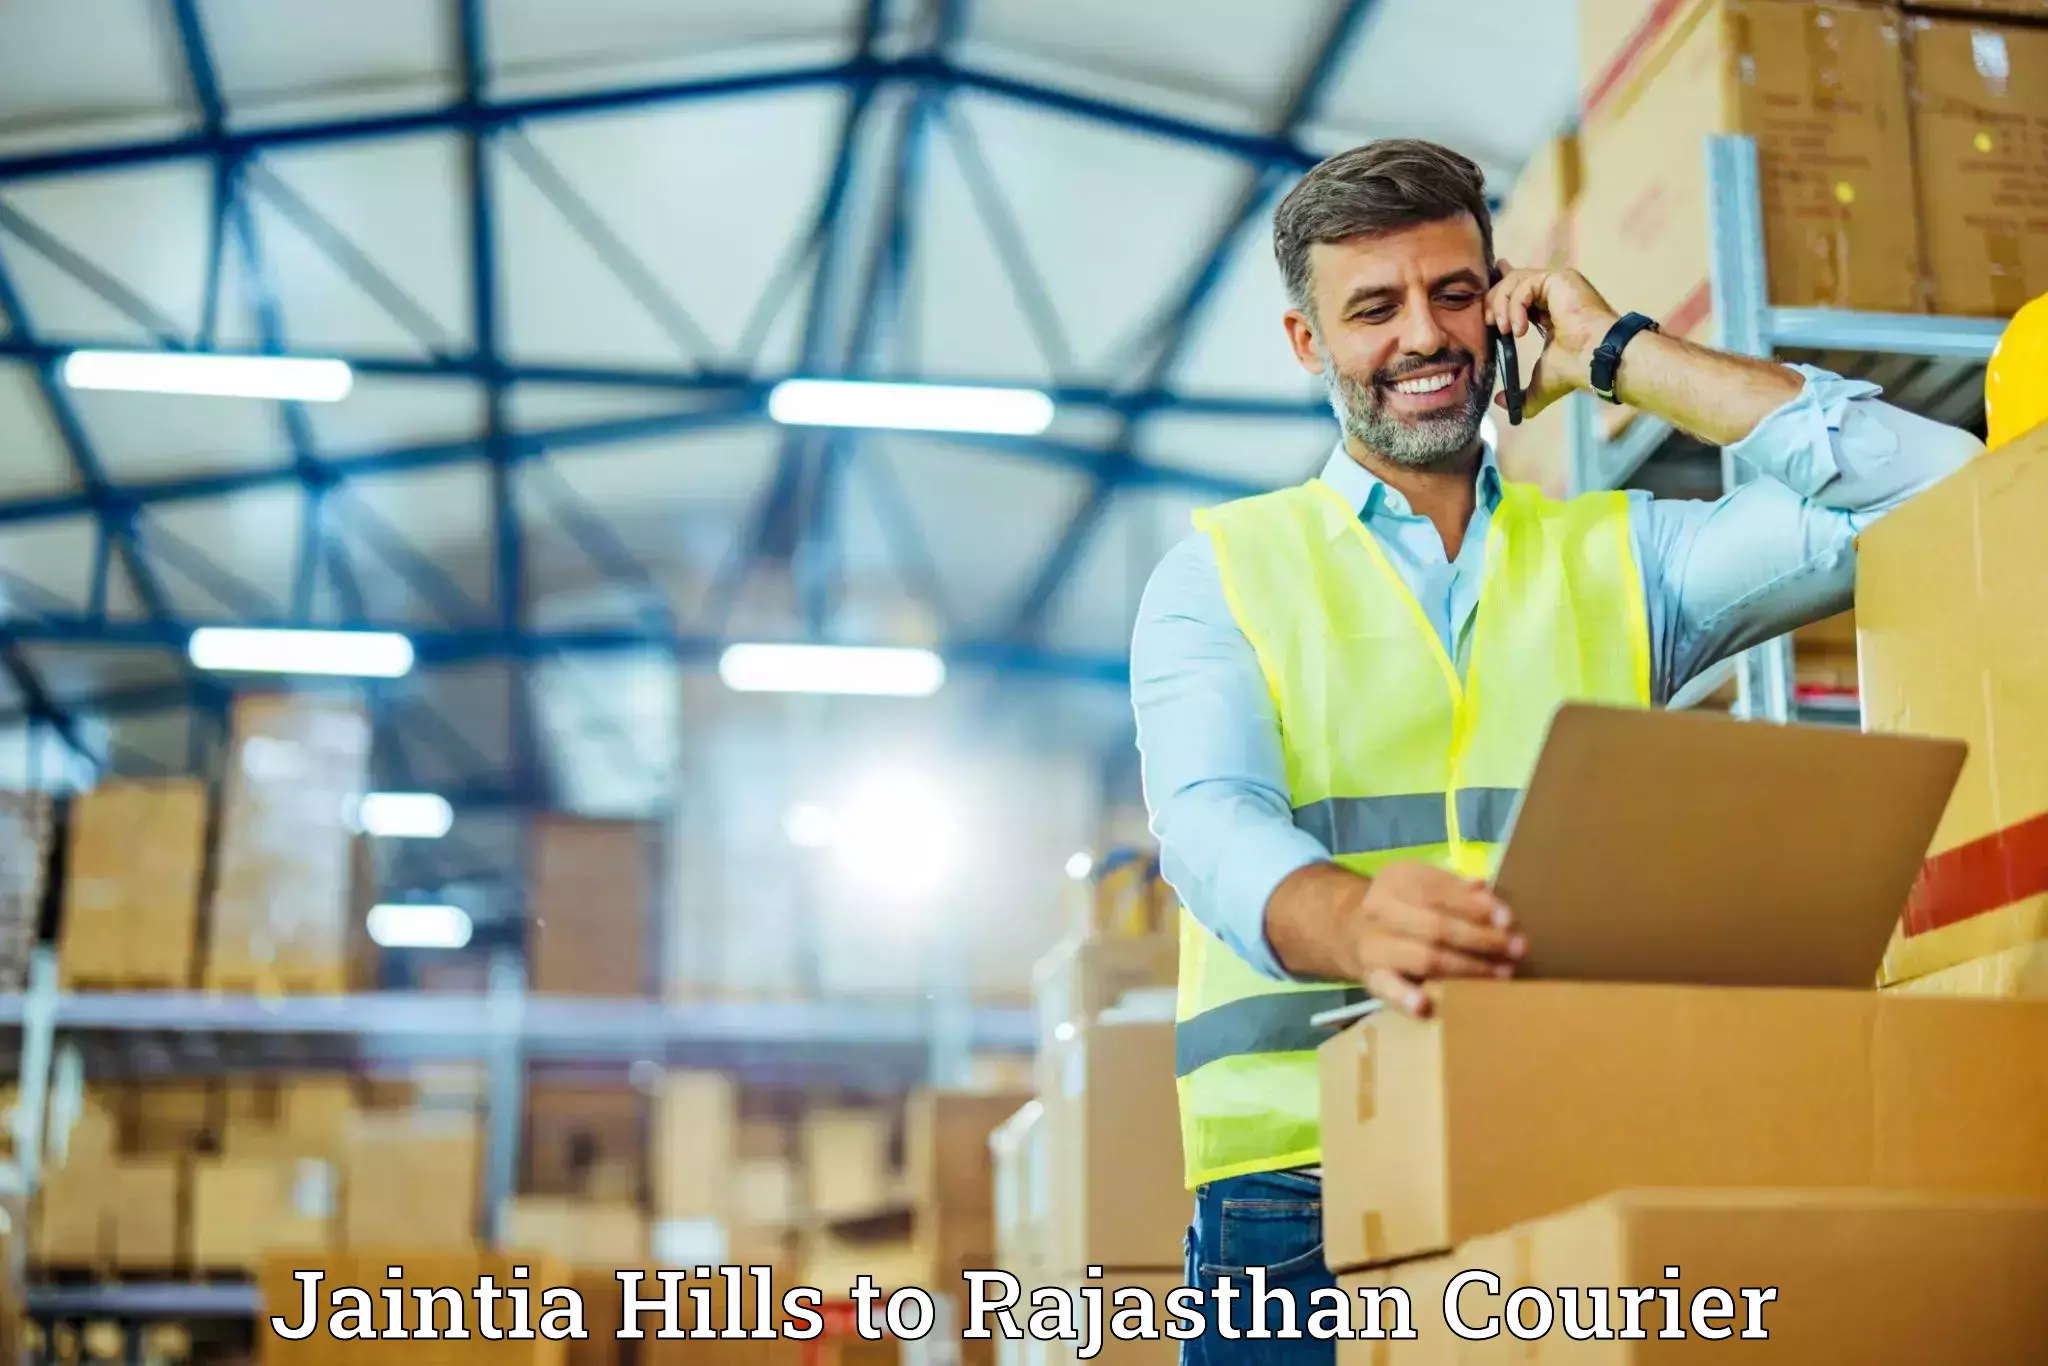 Professional moving company Jaintia Hills to Weir